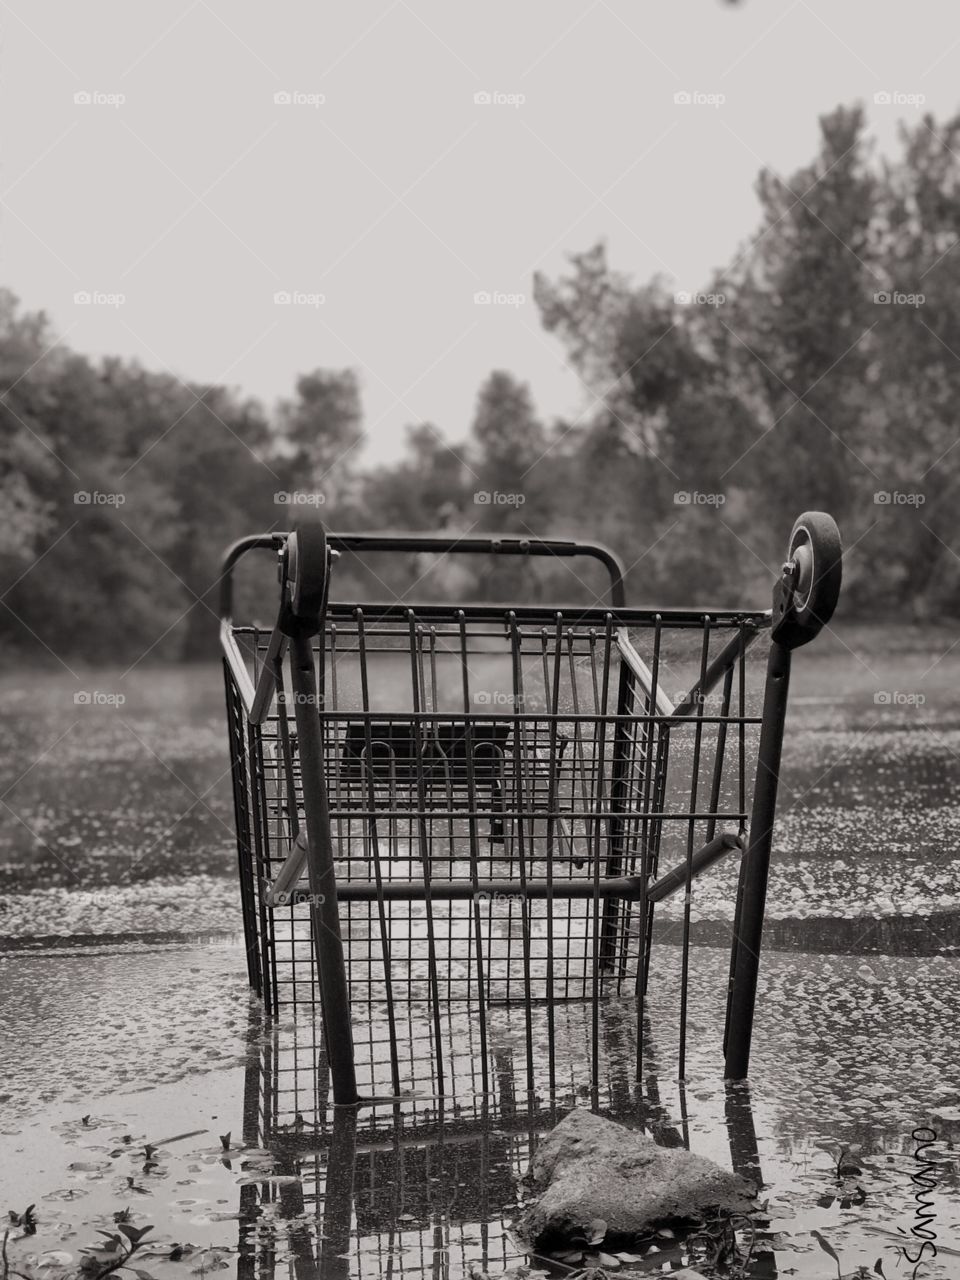 “Shopping cart” thrown into the local slough. It’s getting worse every day. The rise of homelessness isn’t helping. What’s the city doing to alleviate this situation? 